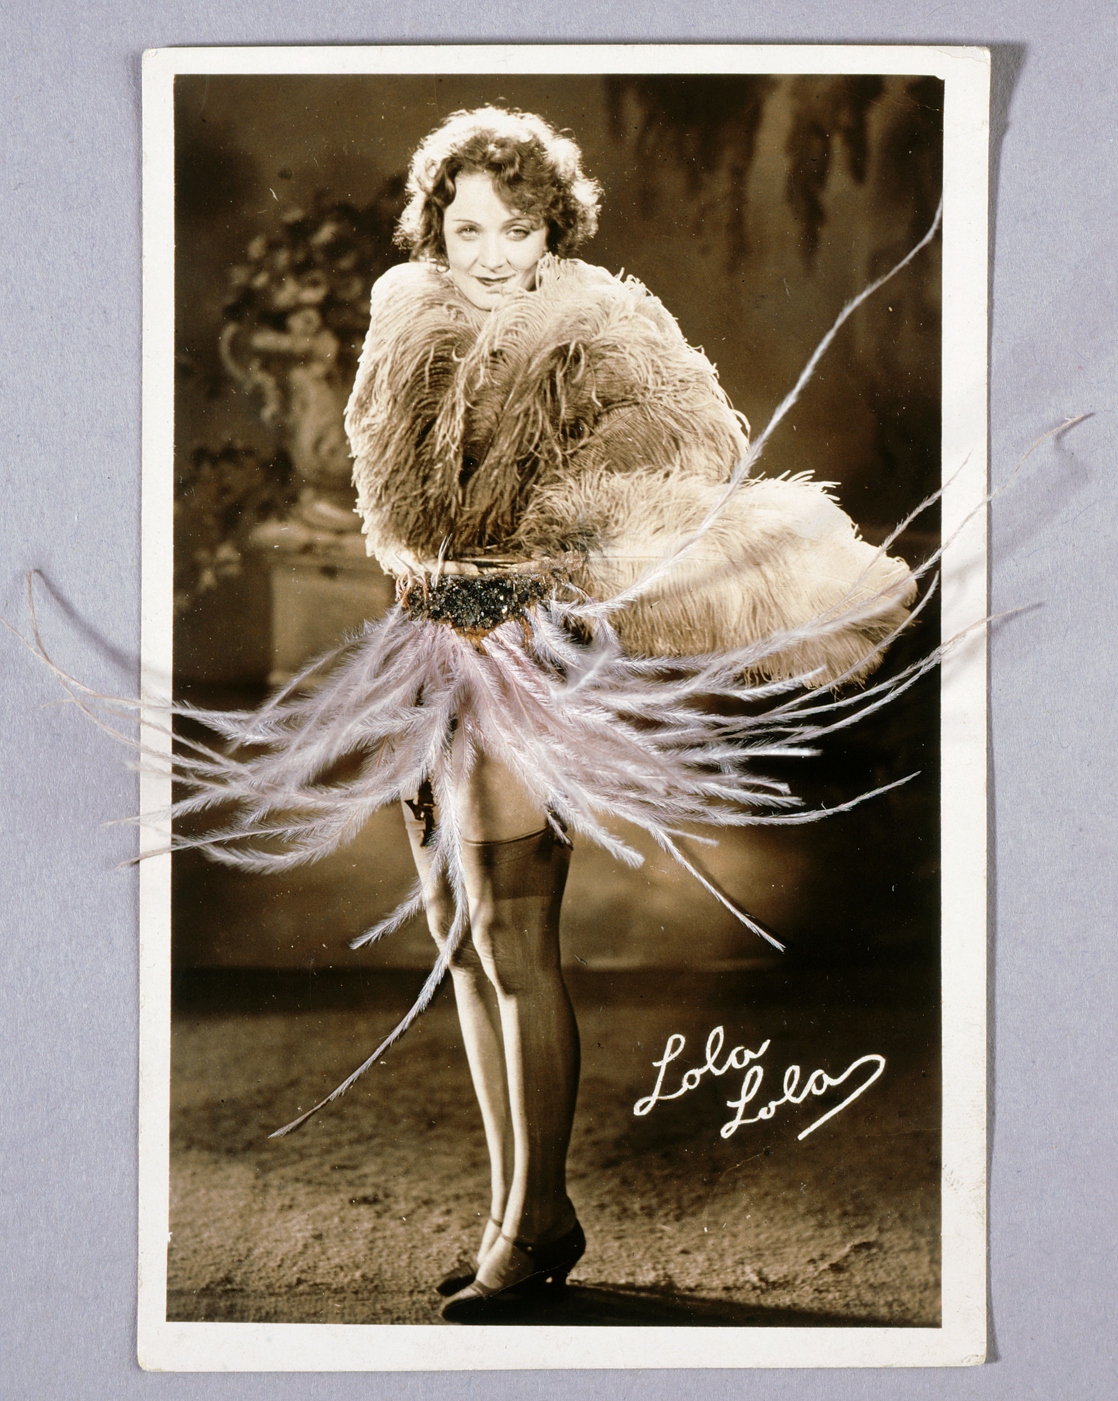 Postcard of Marlene Dietrich with real feathers